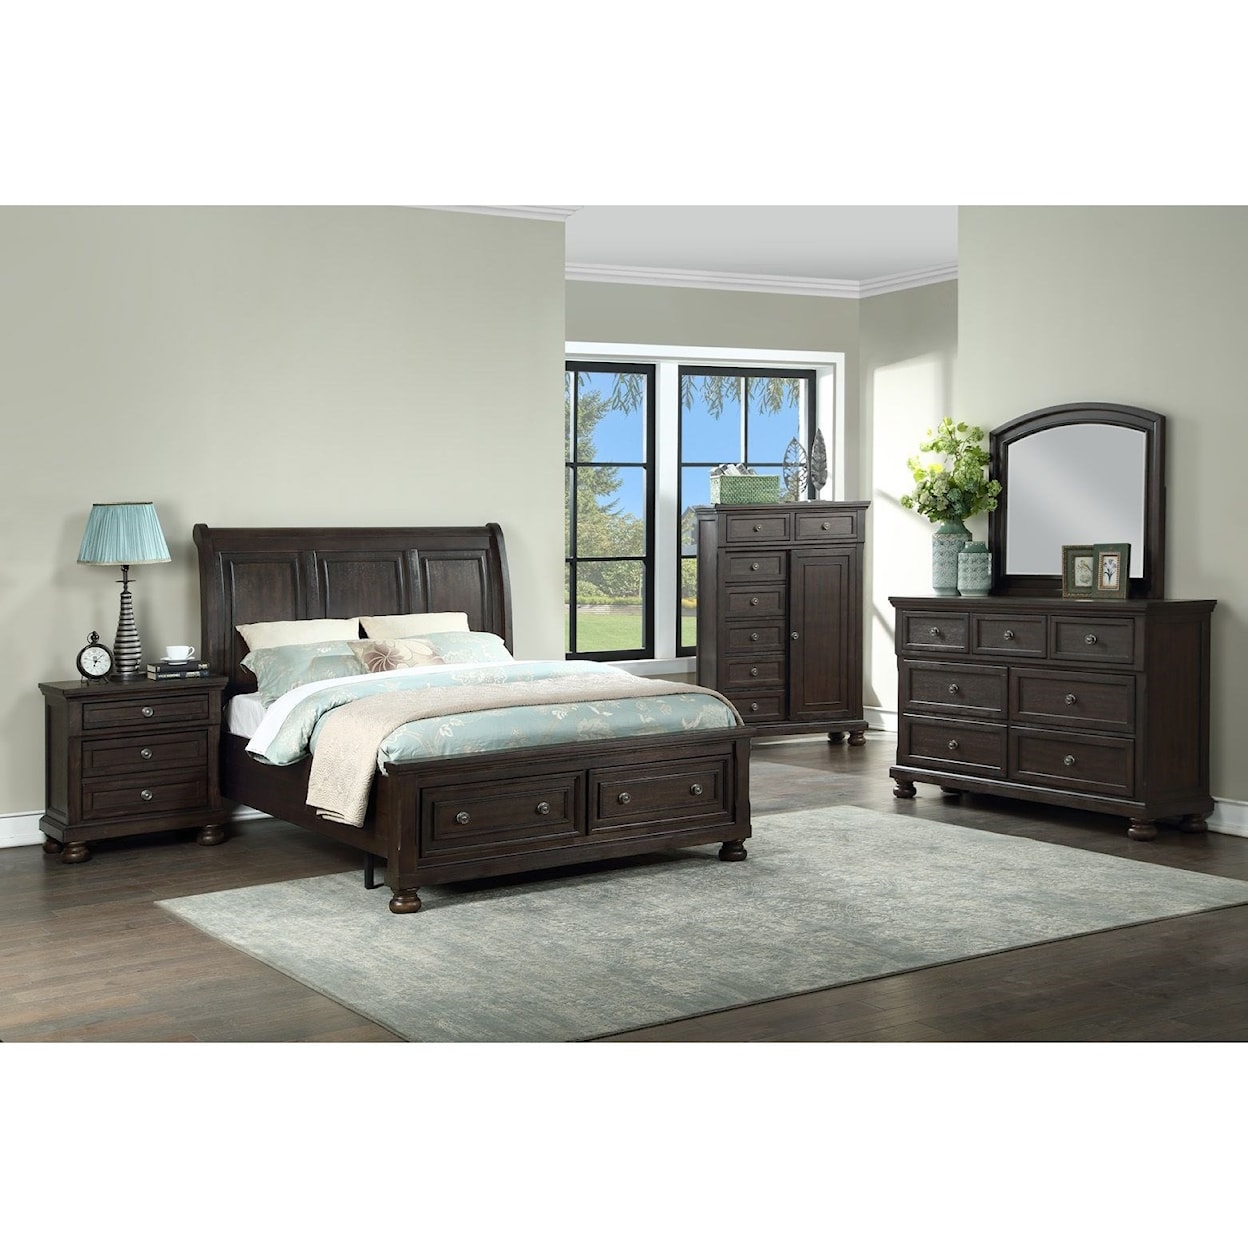 Avalon Furniture B02255 Queen Bedroom Group